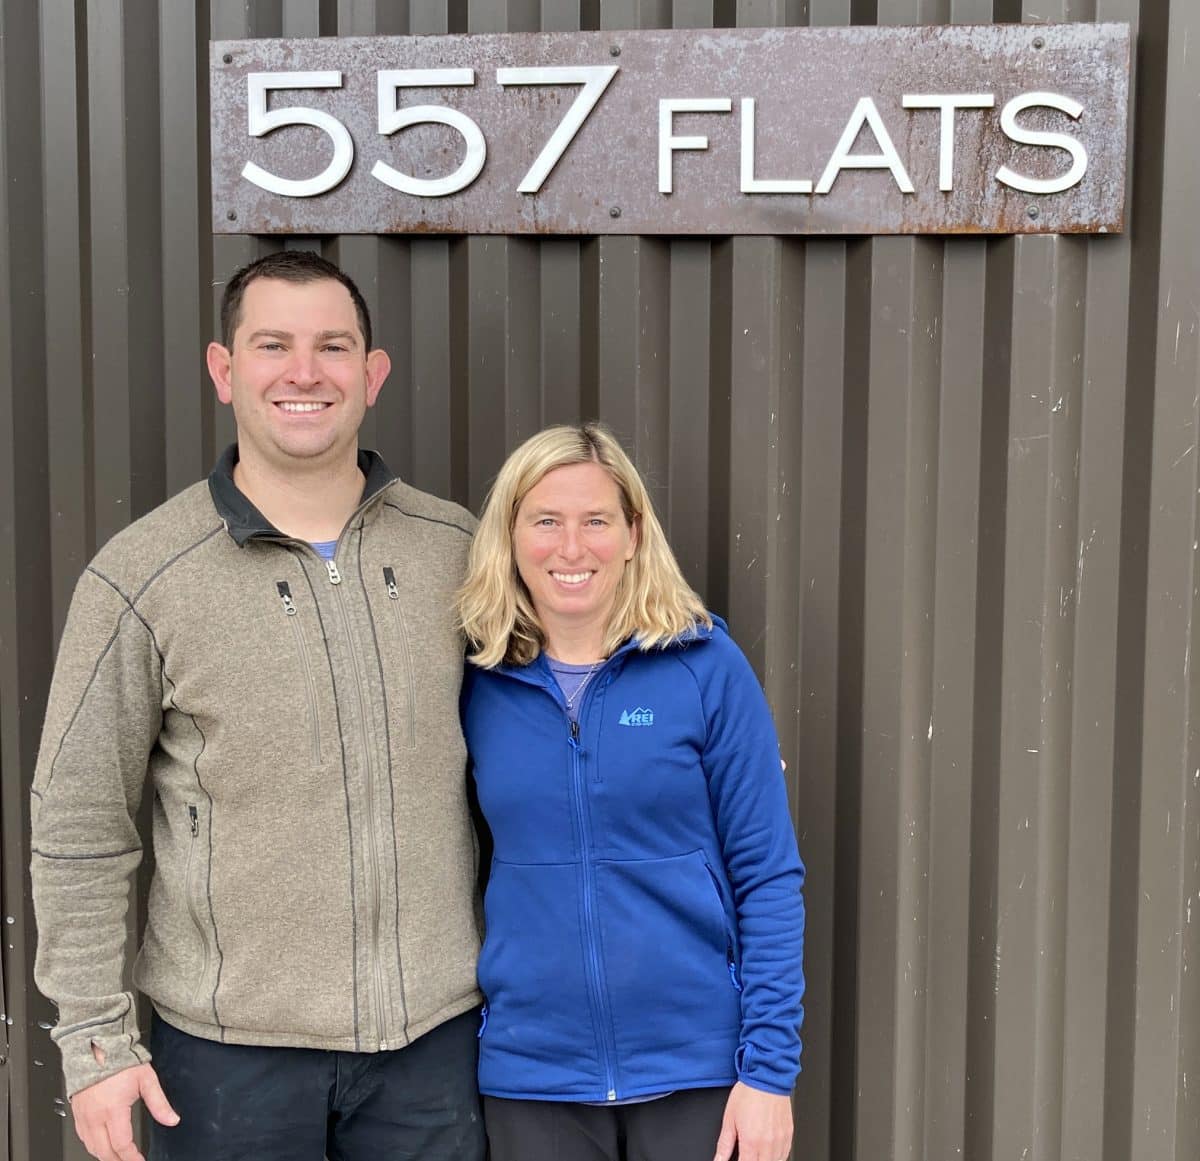 Los Alamos Chiropractic And Acupuncture Center Announce New Location At 557 Flats